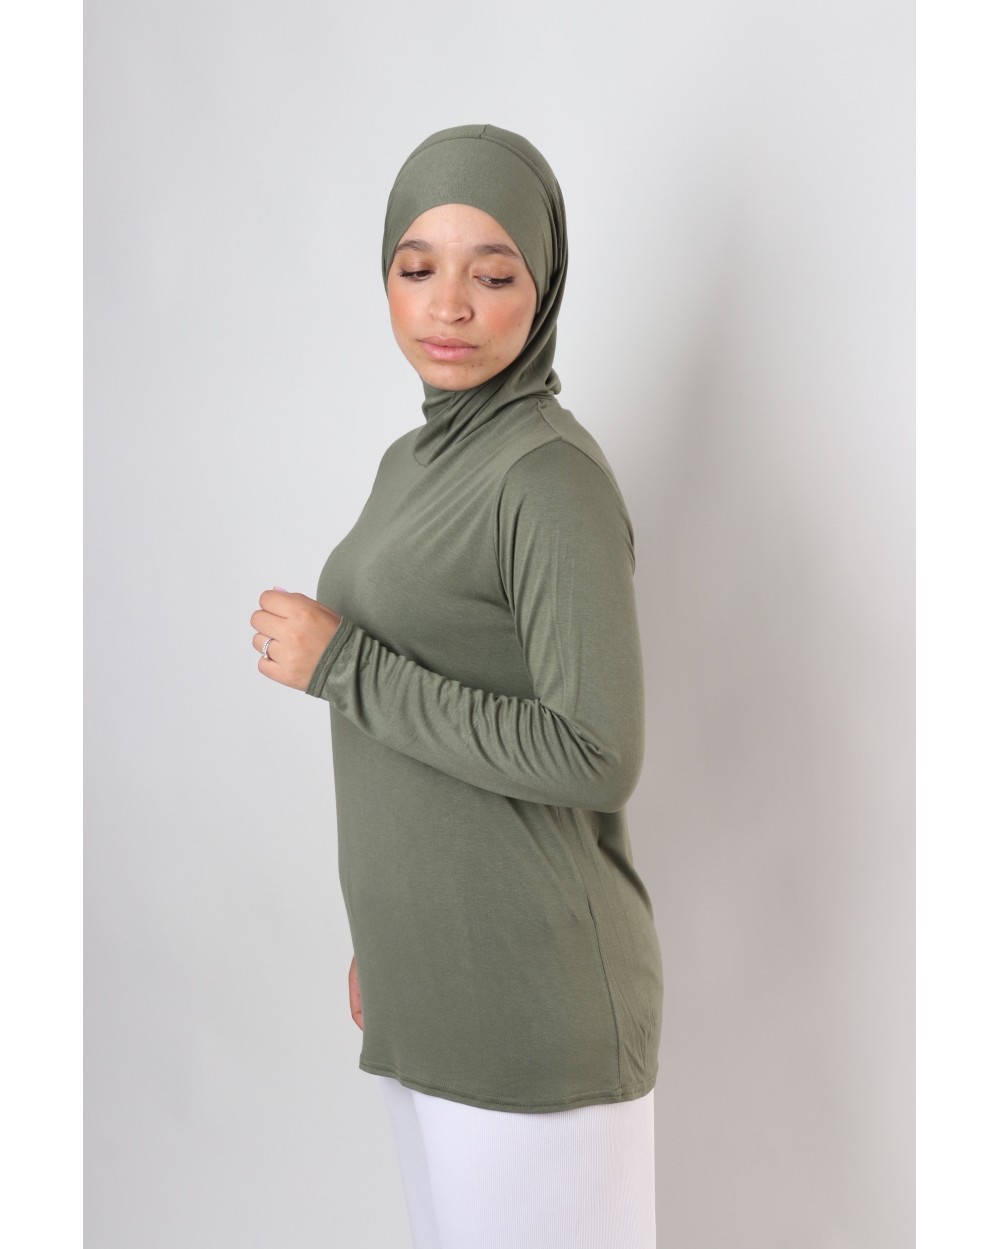 Mary Short body with integrated hijab